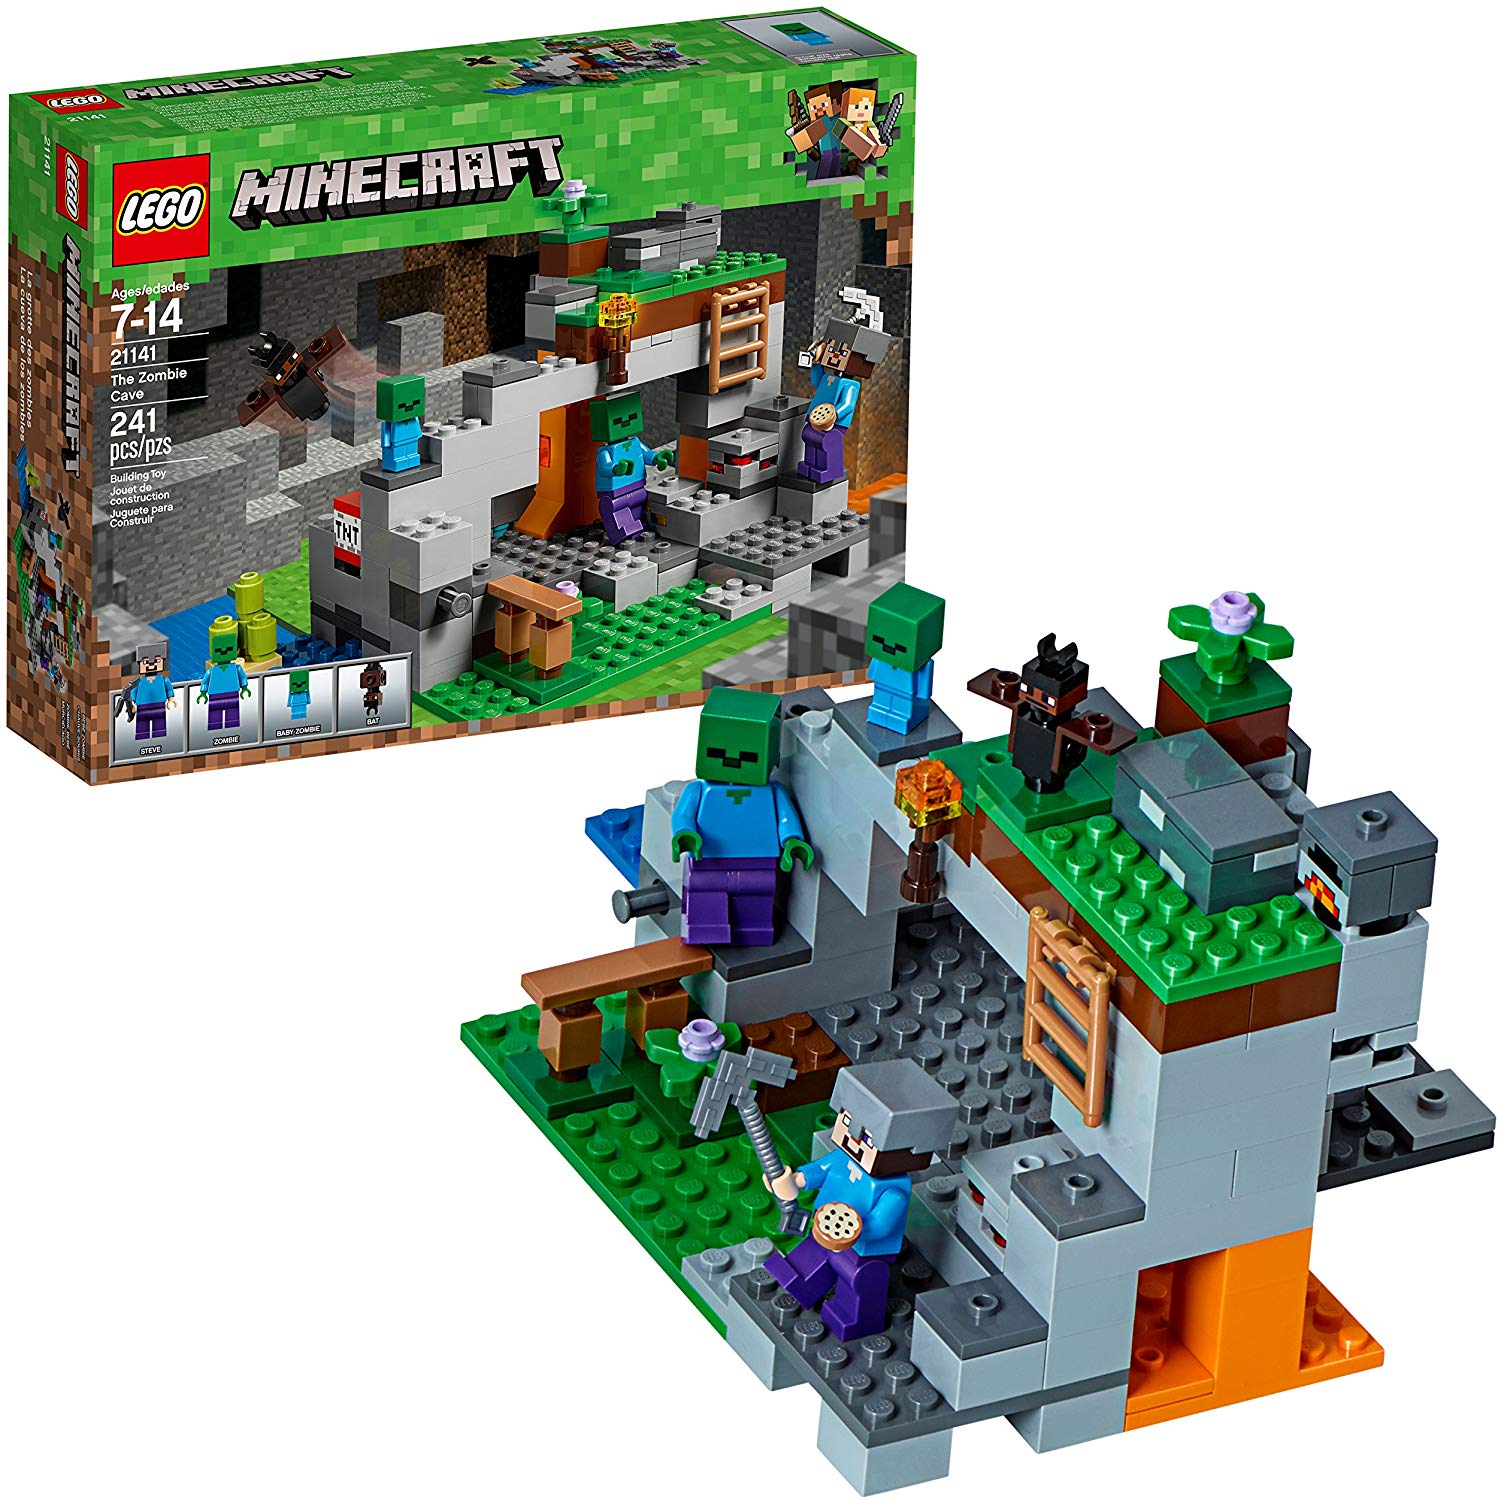 Lego Minecraft 21141 Construction Kit The Zombie Cave, 241-Piece